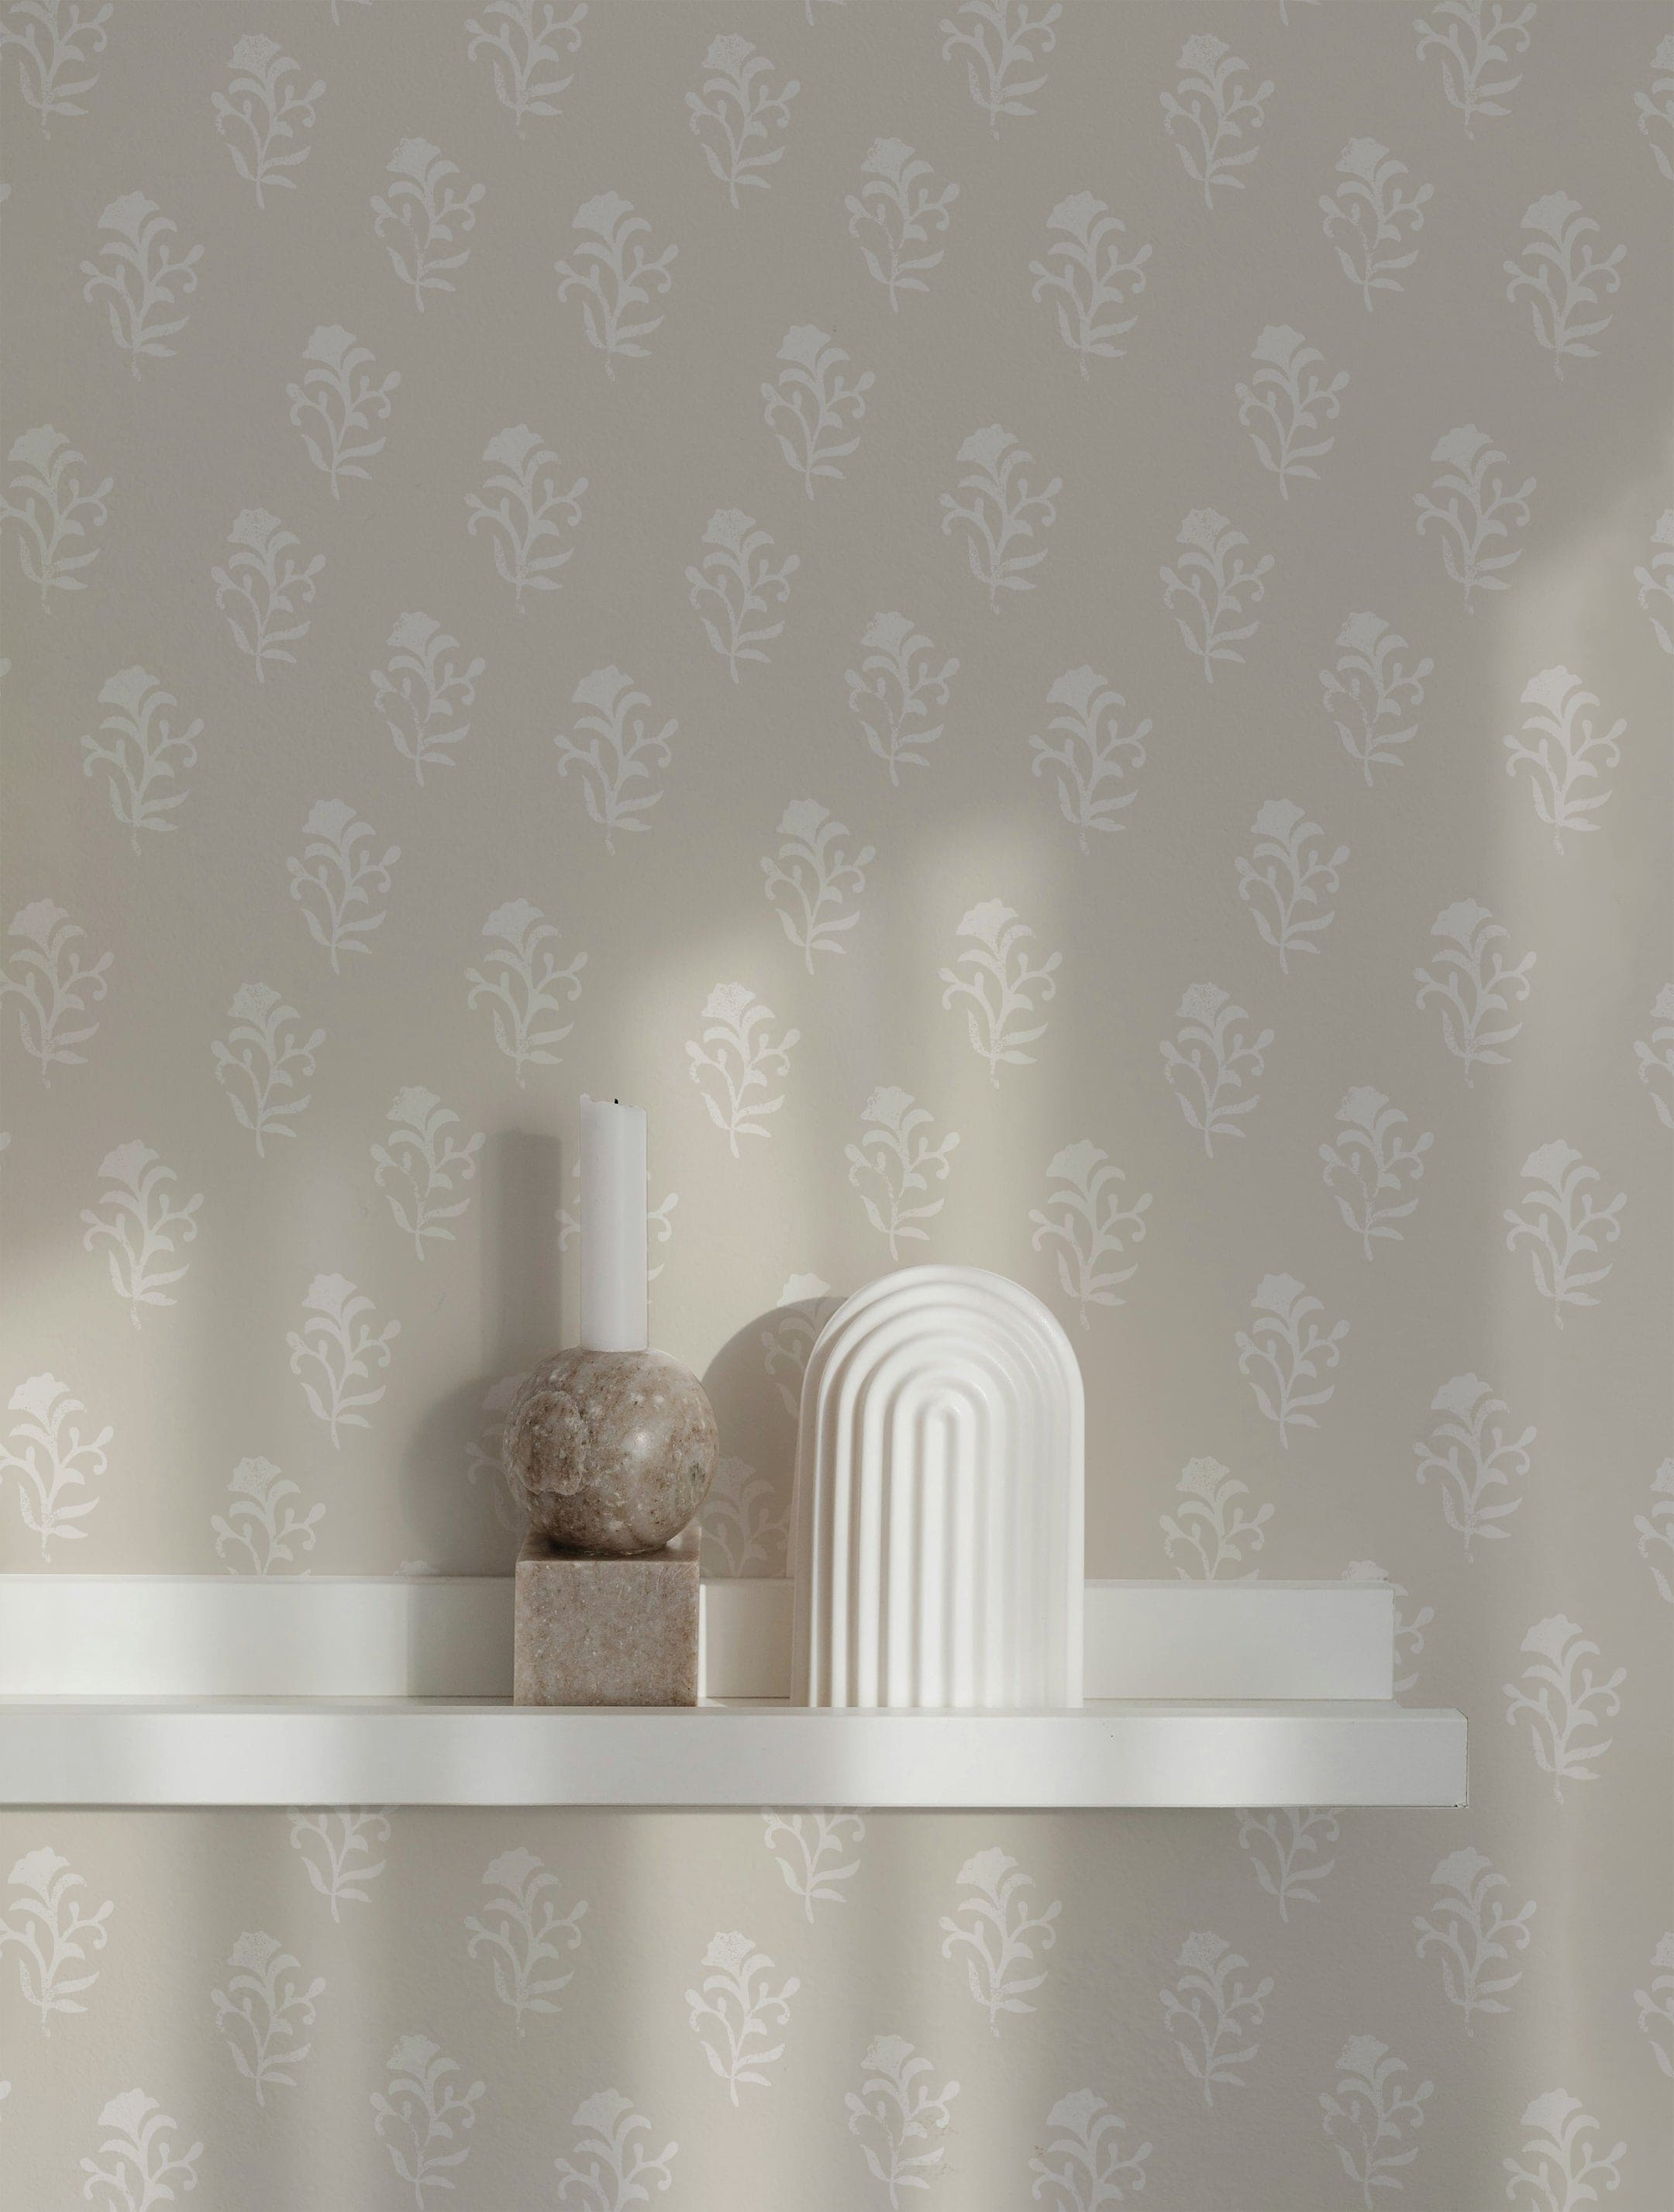 An interior scene featuring the Heritage Fleur Wallpaper. The wallpaper's pattern of white floral motifs on a beige background creates a serene backdrop. A white floating shelf holds minimalist decor items, including a marble sculpture and a white candle holder, illuminated by soft, natural light.